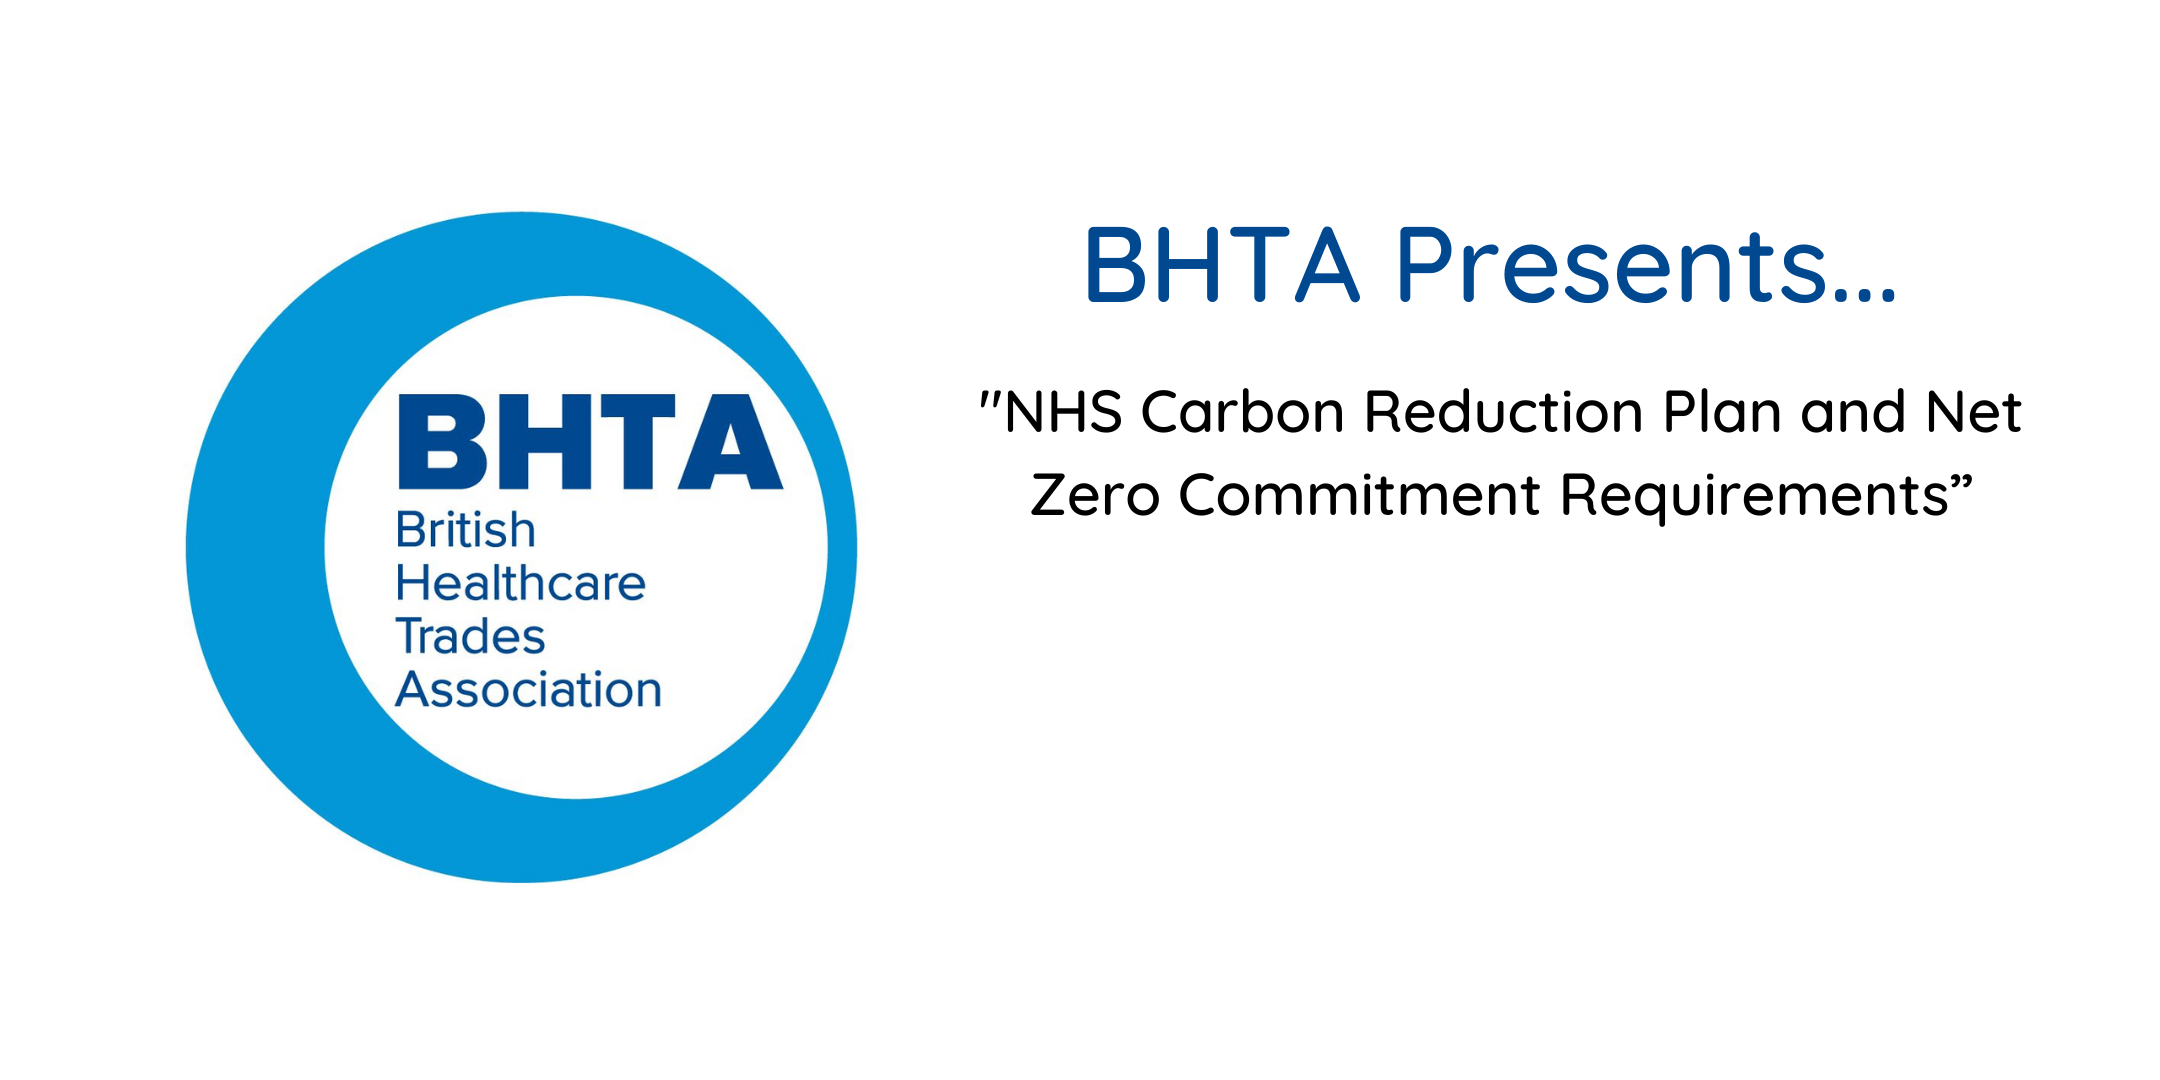 BHTA Presents NHS Carbon Reduction Plan and Net Zero Commitment Requirements